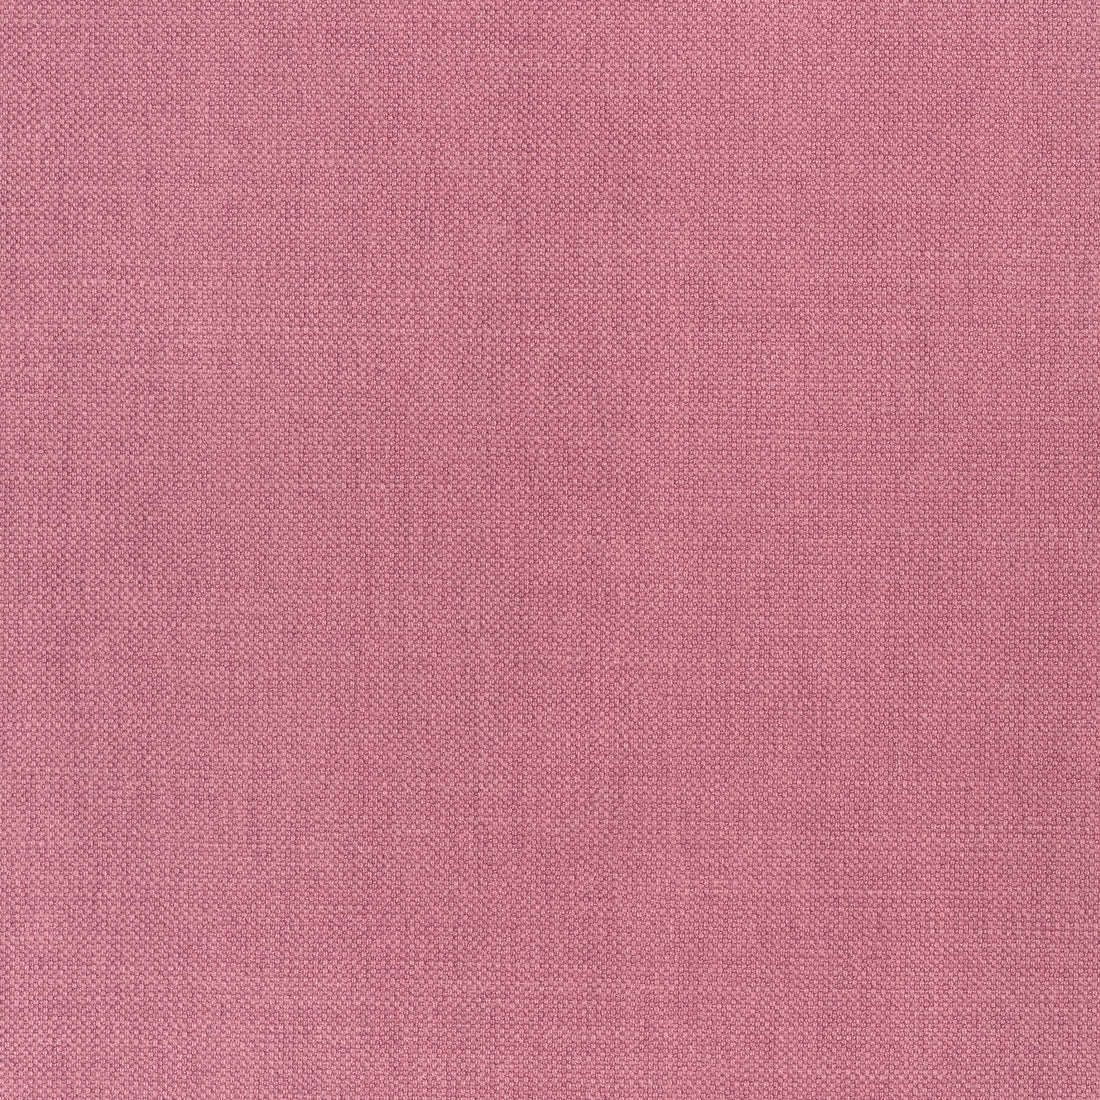 Prisma fabric in peony color - pattern number W70132 - by Thibaut in the Woven Resource Vol 12 Prisma Fabrics collection